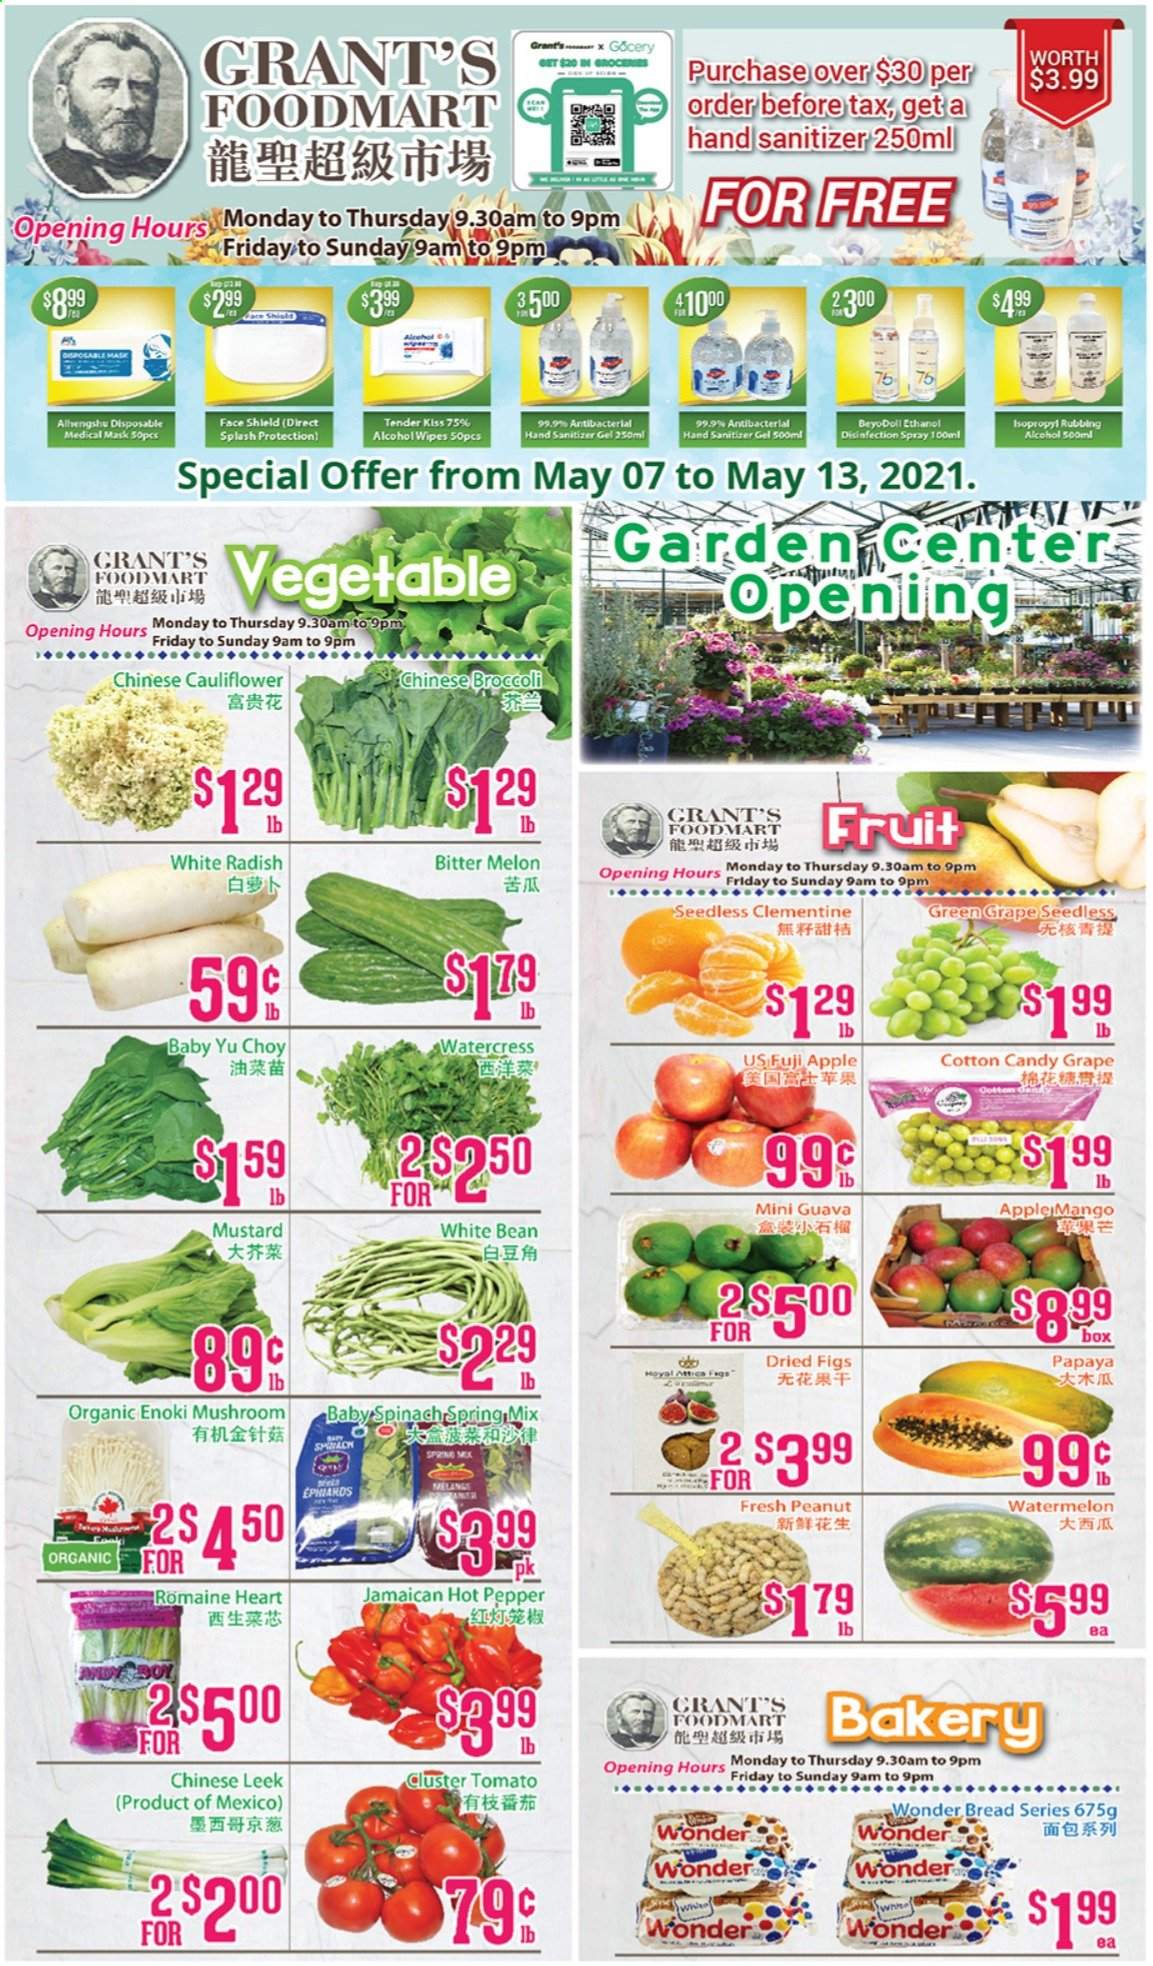 thumbnail - Grant's Foodmart Flyer - May 07, 2021 - May 13, 2021 - Sales products - mushrooms, bread, broccoli, cauliflower, leek, radishes, spinach, white radish, figs, guava, watermelon, papaya, Fuji apple, melons, cotton candy, watercress, pepper, mustard, dried figs, Grant's, hand sanitizer, chinese broccoli. Page 1.